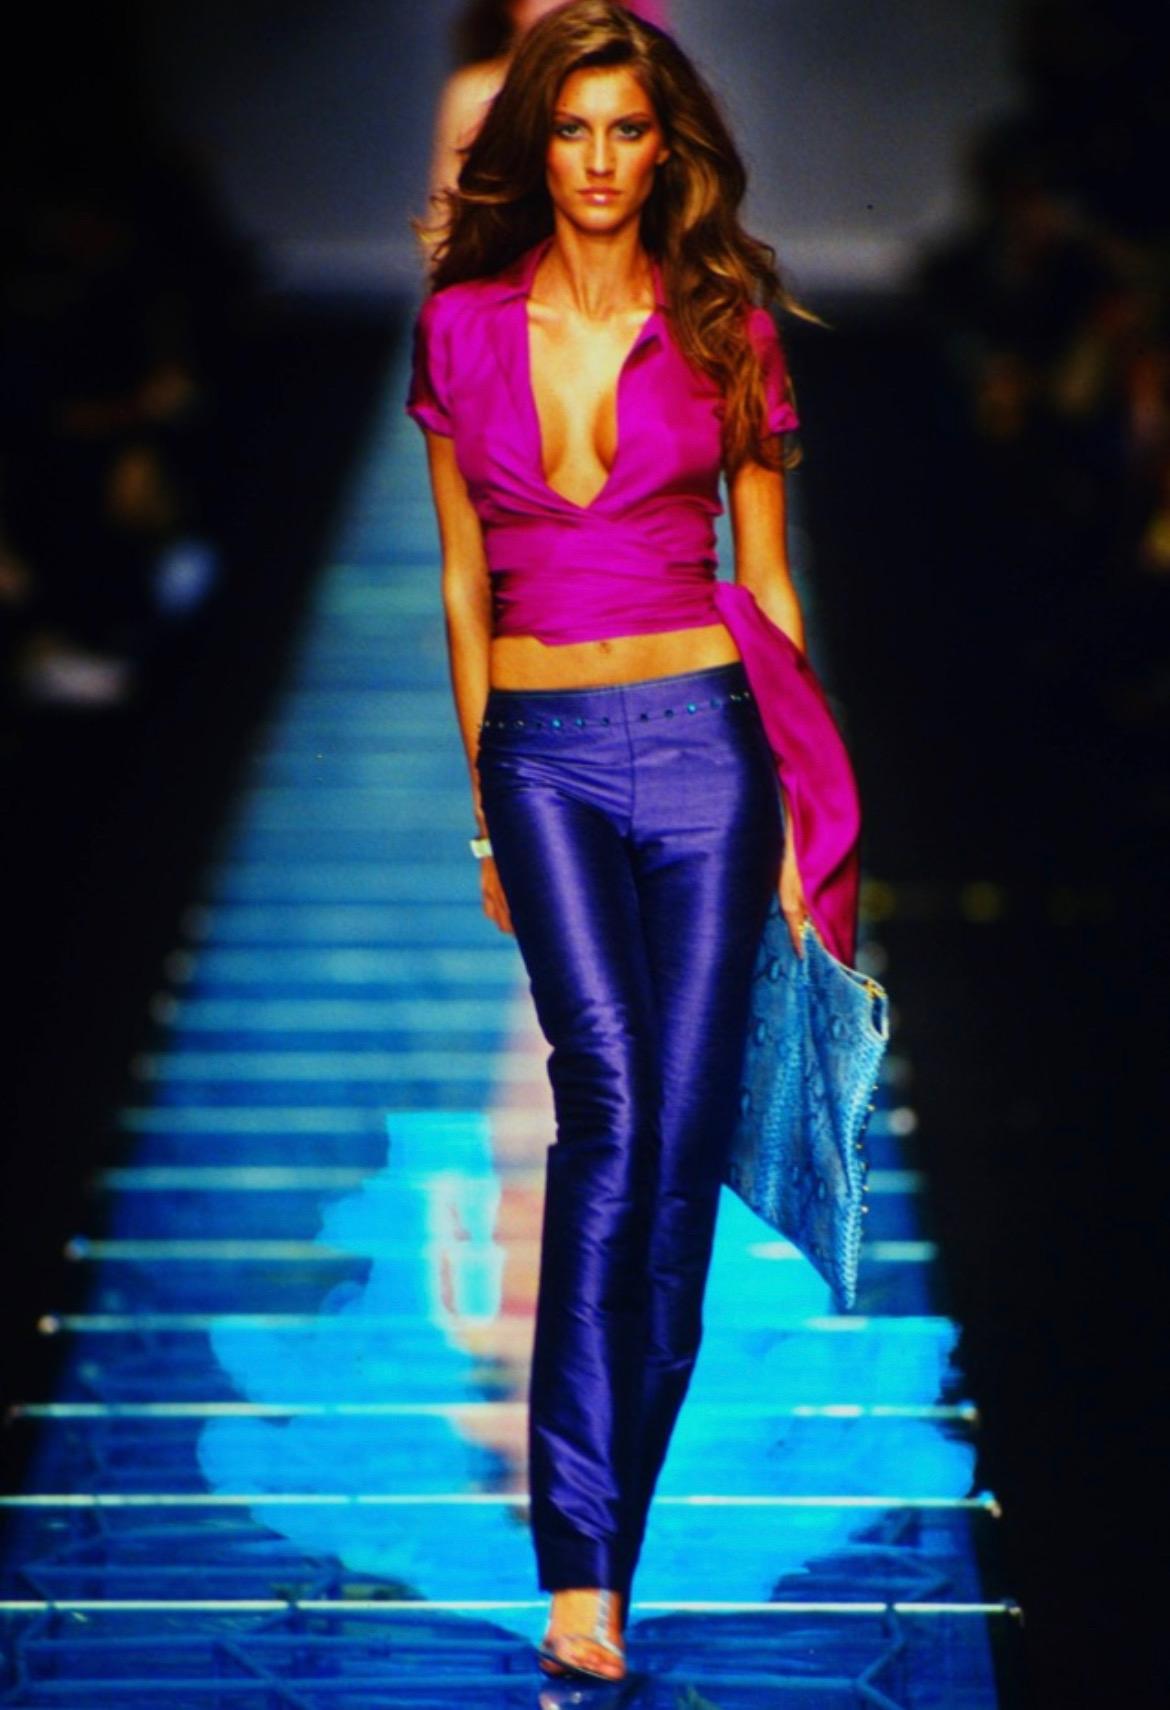 Presenting a purple silk wrap Gianni Versace Couture top, designed by Donatella Versace. From the Spring/Summer 2000 collection, this top debuted on the season's runway as part of look 30 modeled by Gisele Bündchen. The top was also worn by Amber